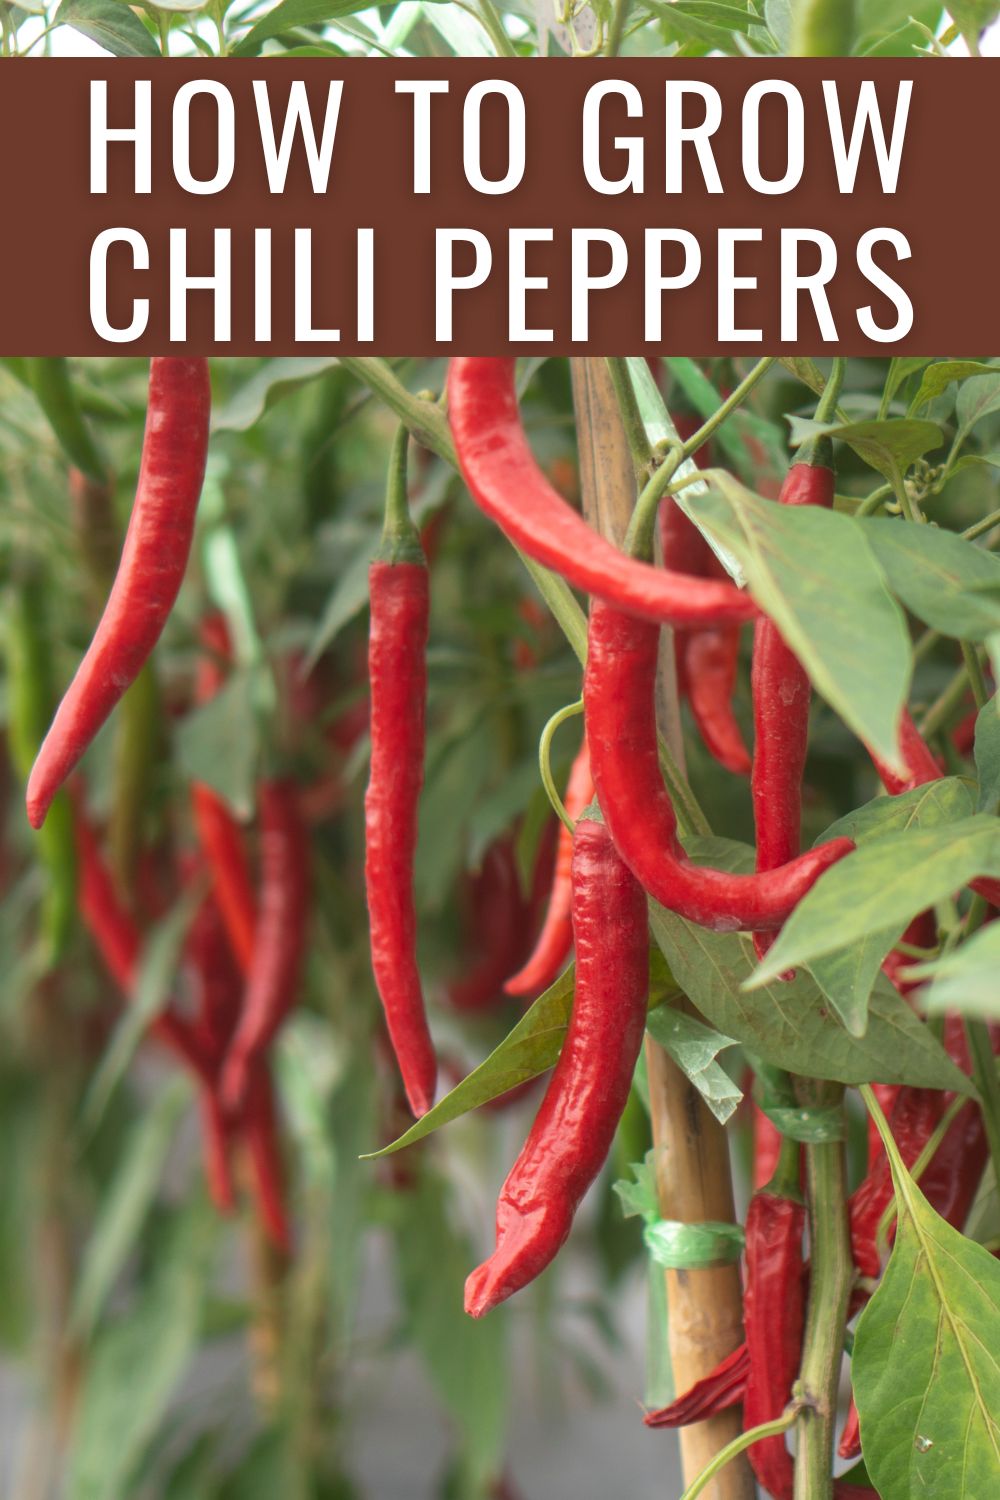  How to grow chili peppers.